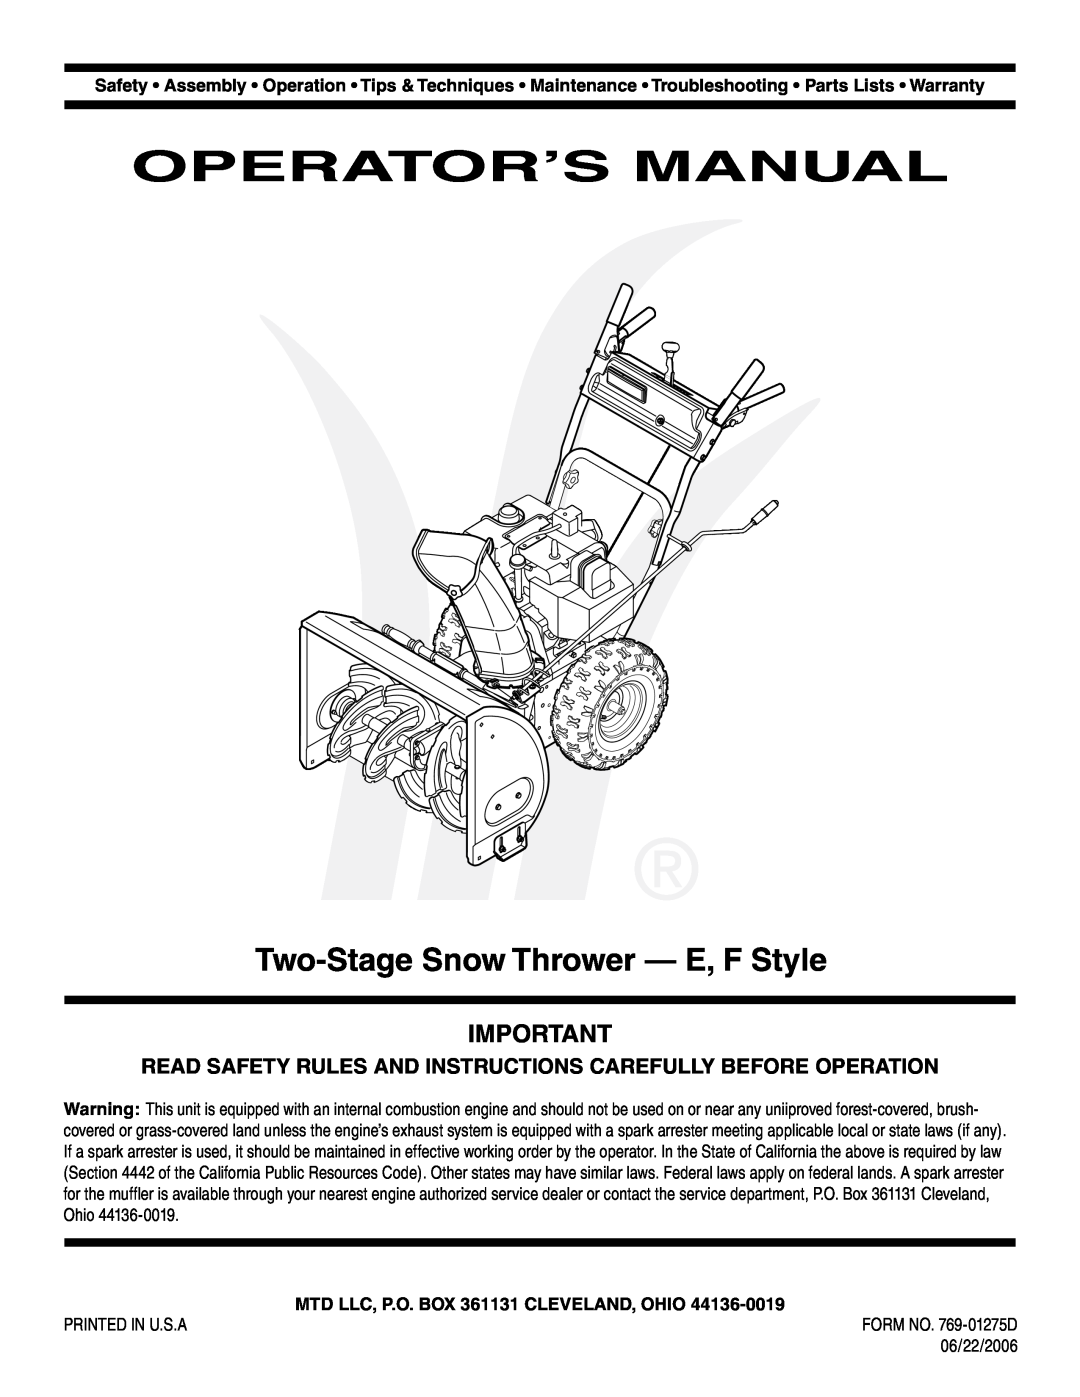 MTD 769-01275D warranty Operator’S Manual, Two-Stage Snow Thrower - E, F Style, MTD LLC, P.O. BOX 361131 CLEVELAND, OHIO 